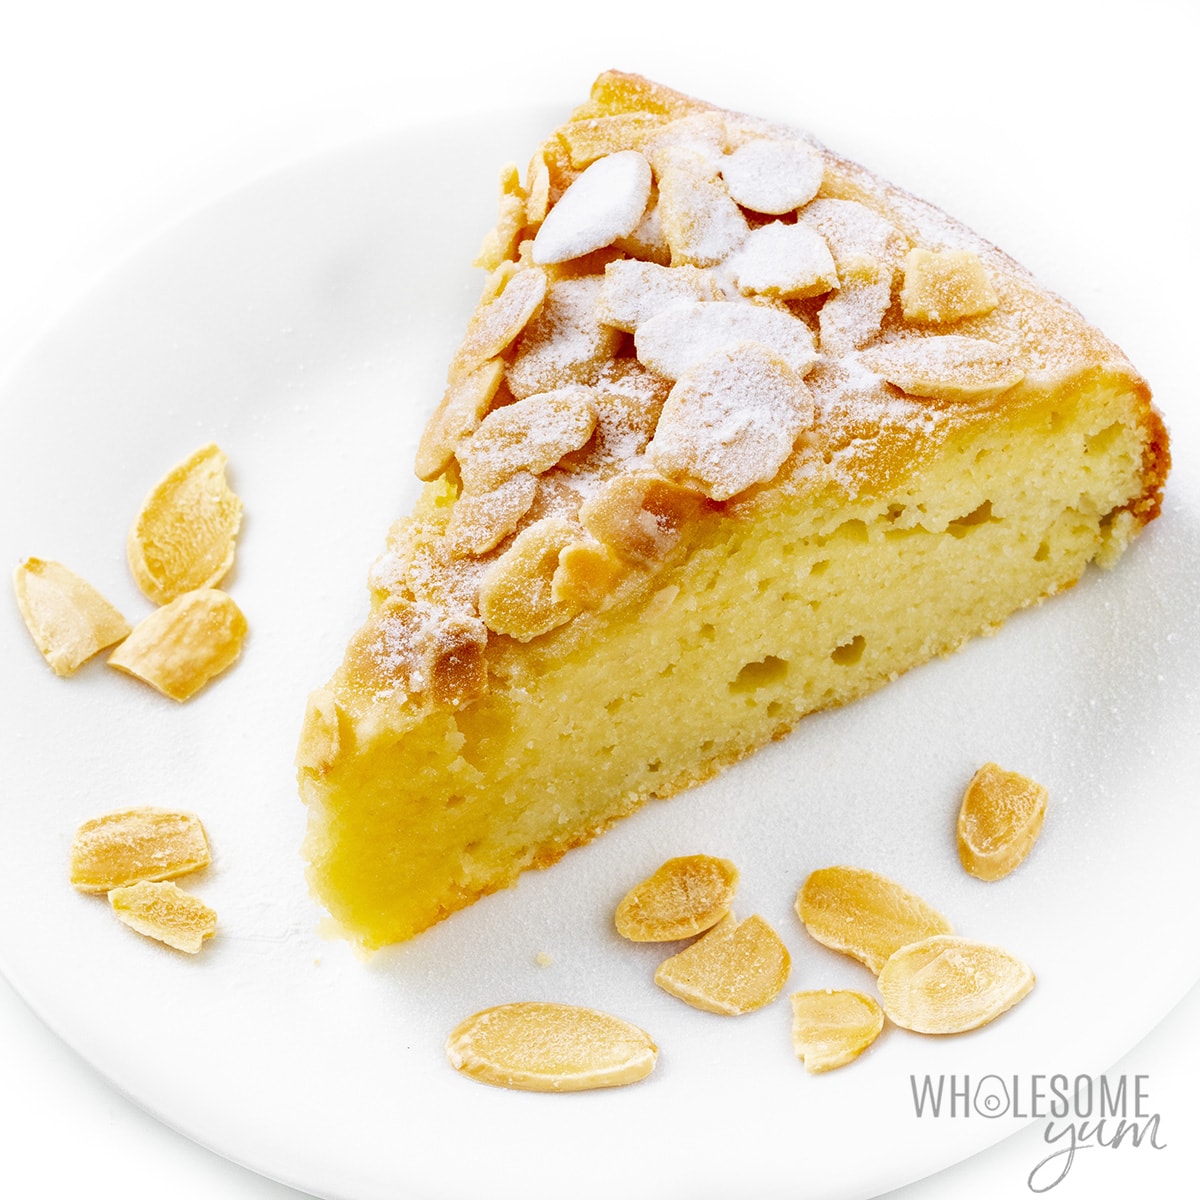 Almond flour cake slice on a plate with almonds.